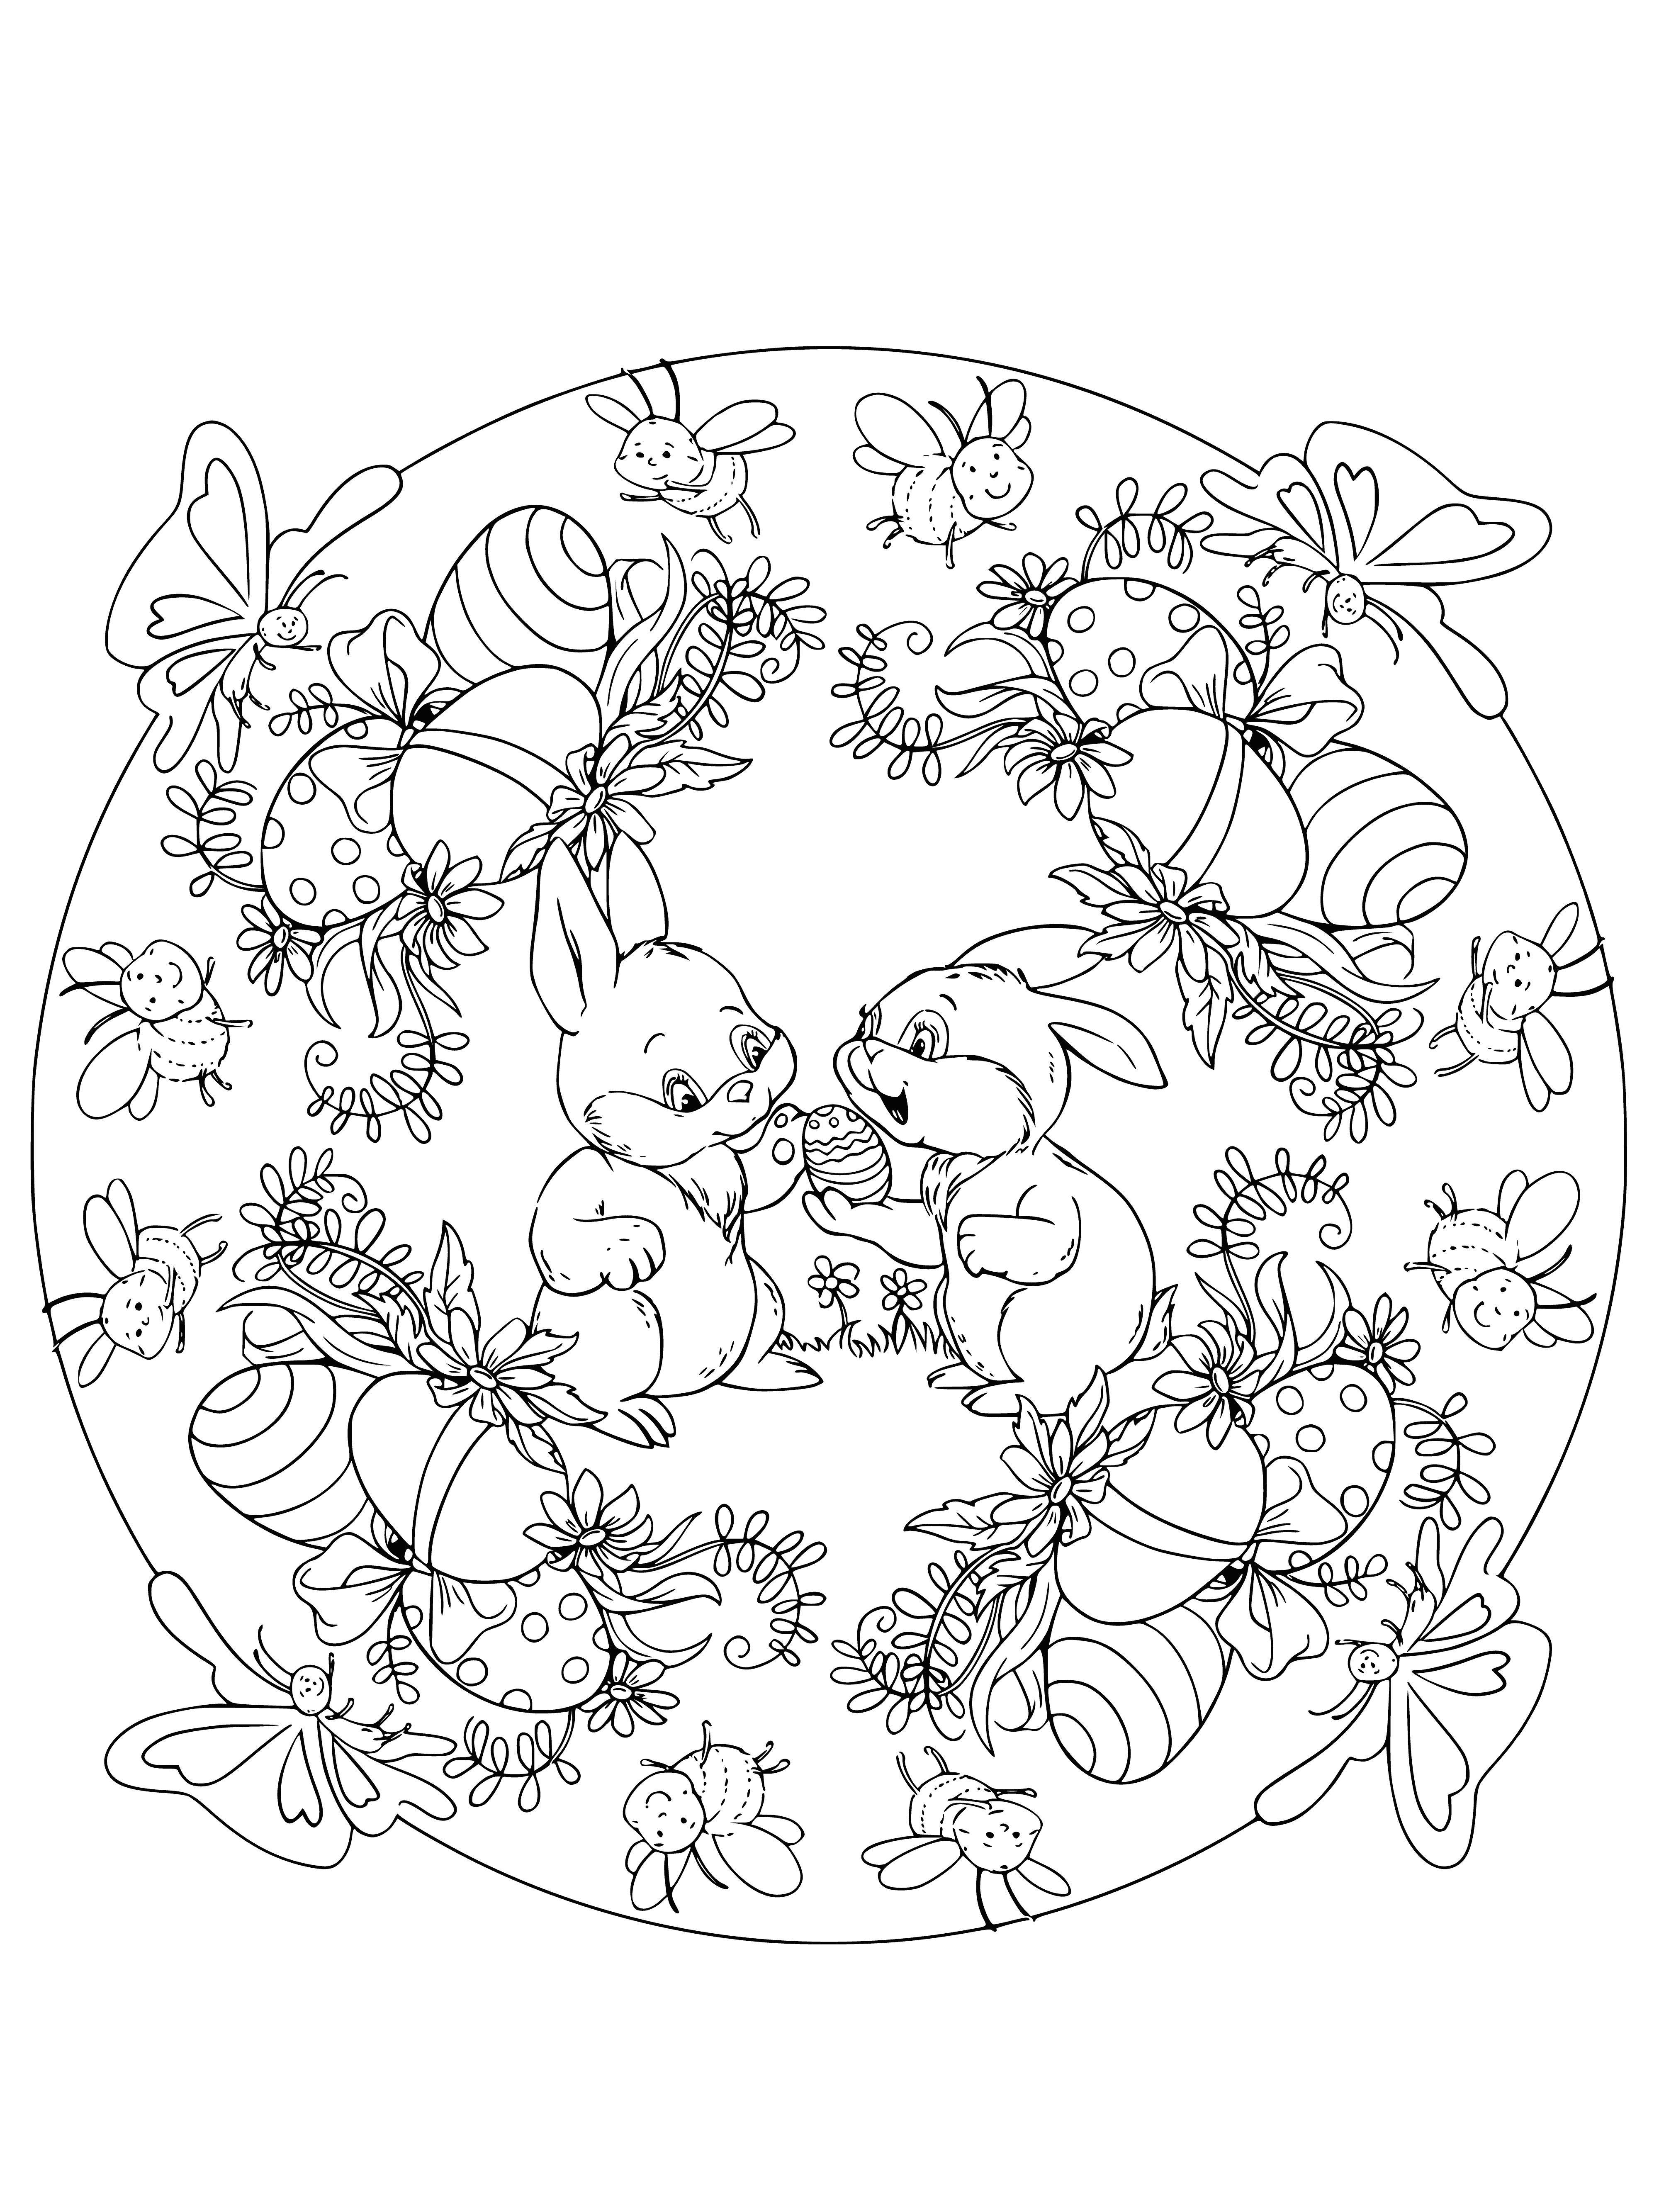 coloring page: 3 Easter bunnies: brown, white, & black, differently-sized, all standing & looking in same direction.